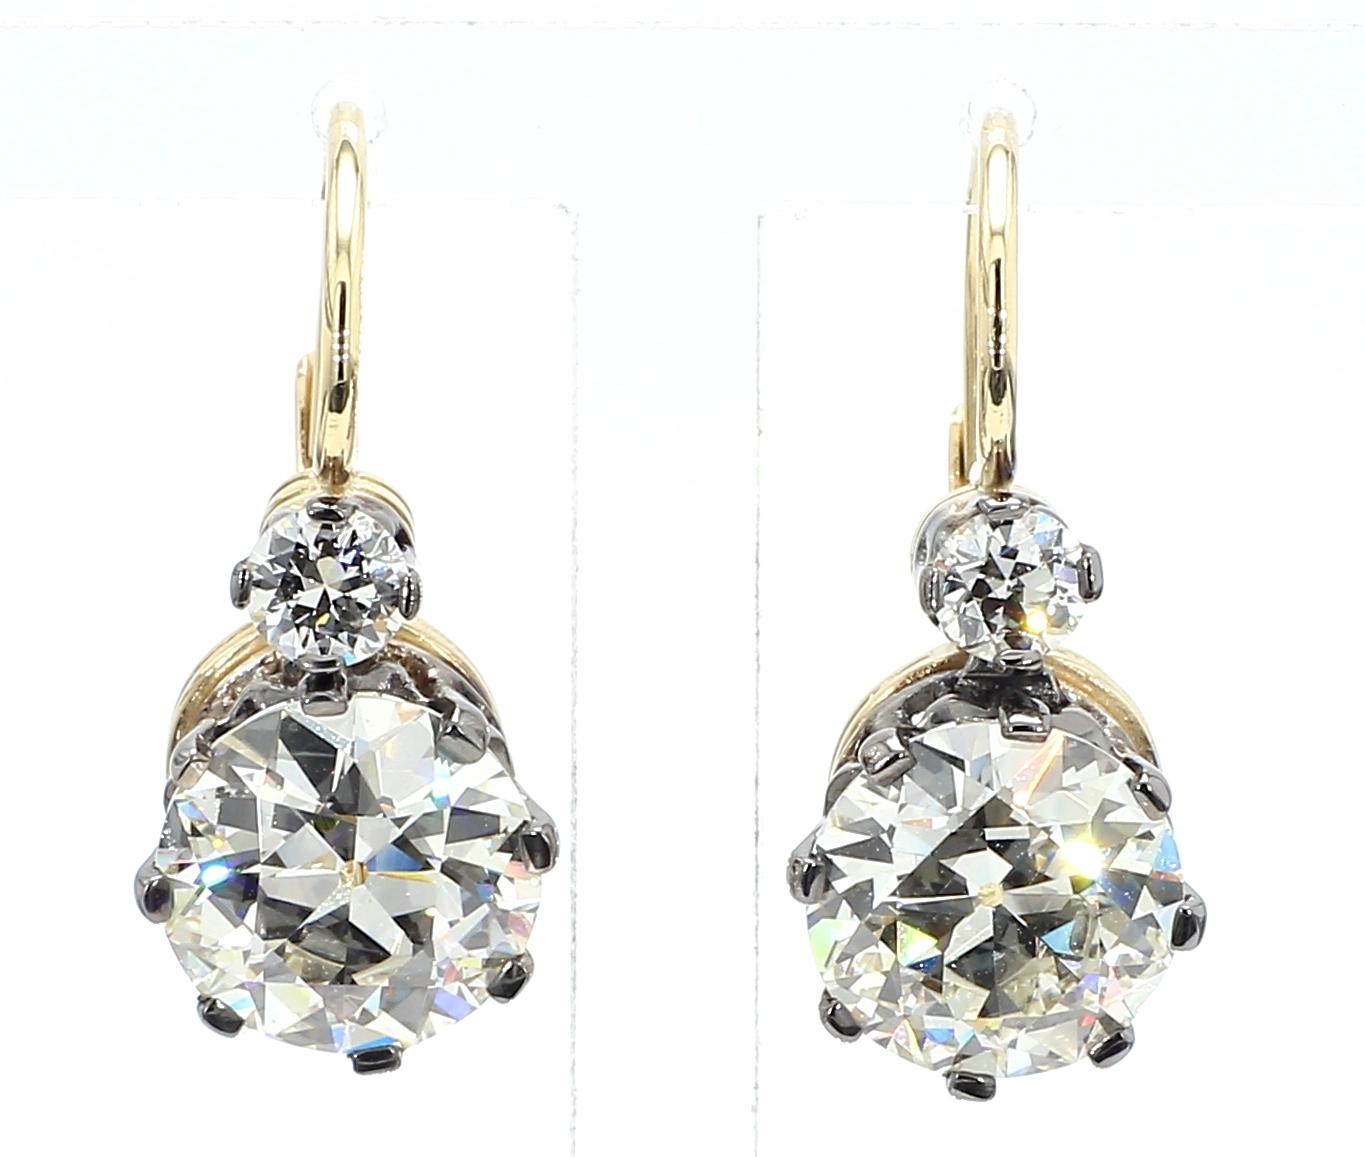 The 6.02 Carat Diamond Earring Antique is a truly remarkable piece of jewelry that exudes elegance and sophistication. Crafted with exquisite attention to detail, this earring showcases a stunning 6.02 carat round-cut diamond, which effortlessly